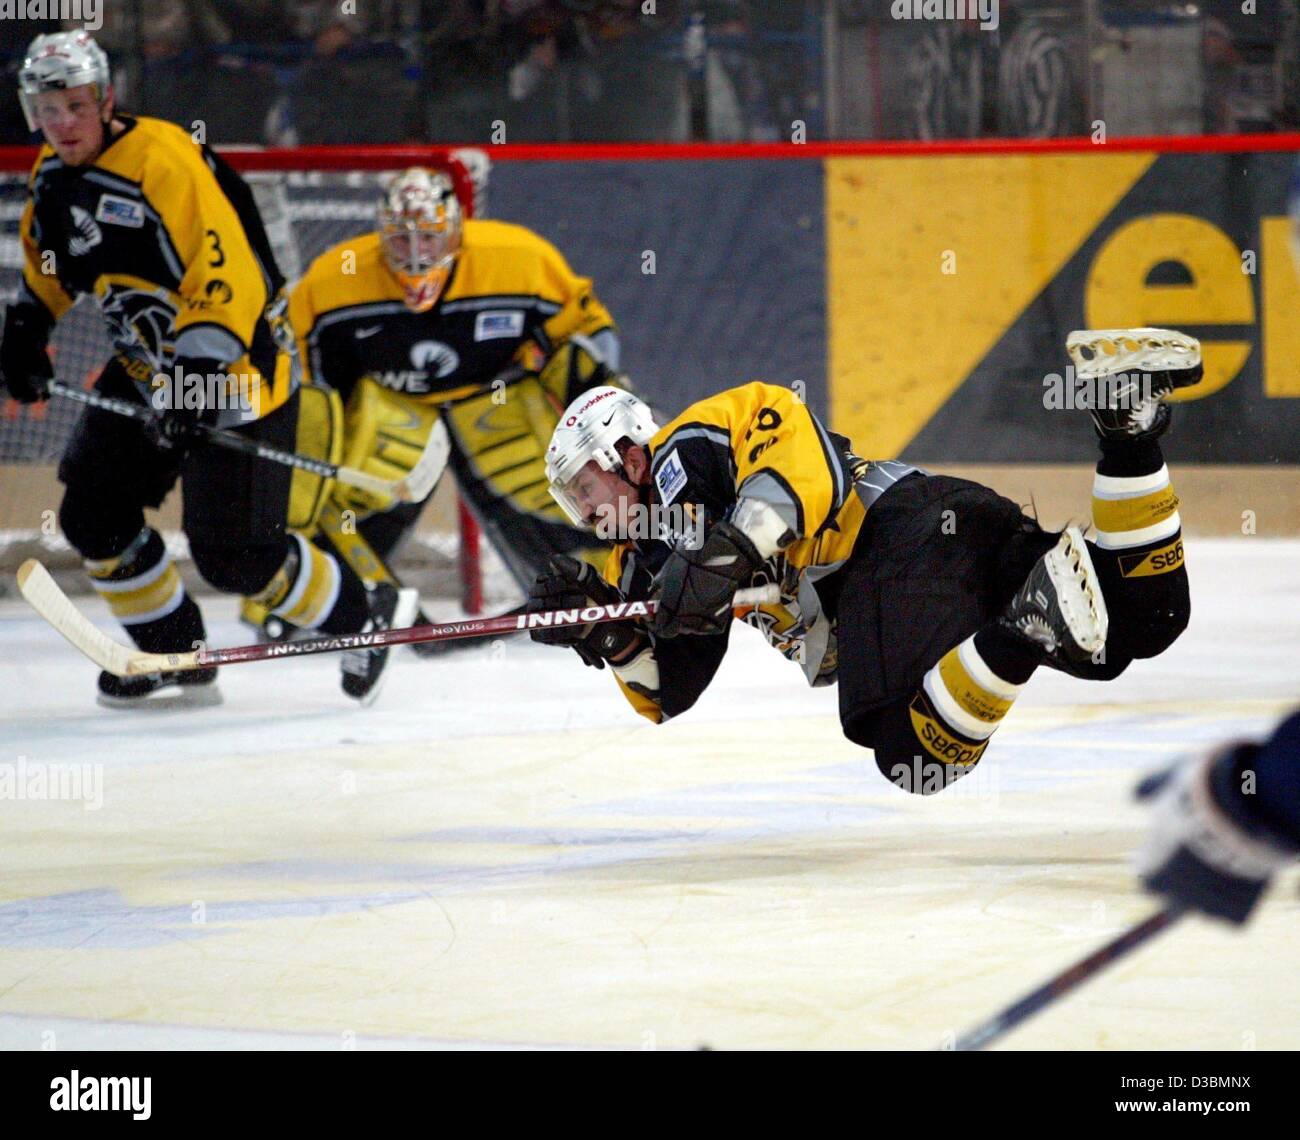 (dpa) - Canadian Gary Shuchuk of the Krefeld Pinguine (Krefeld penguins) seems to fly over the ice rink during the playoff semi final game of the German ice hockey league against the Berlin Eisbaers (Berlin polar bears) in Berlin, 4 April 2003. Krefeld wins 1-0. Stock Photo